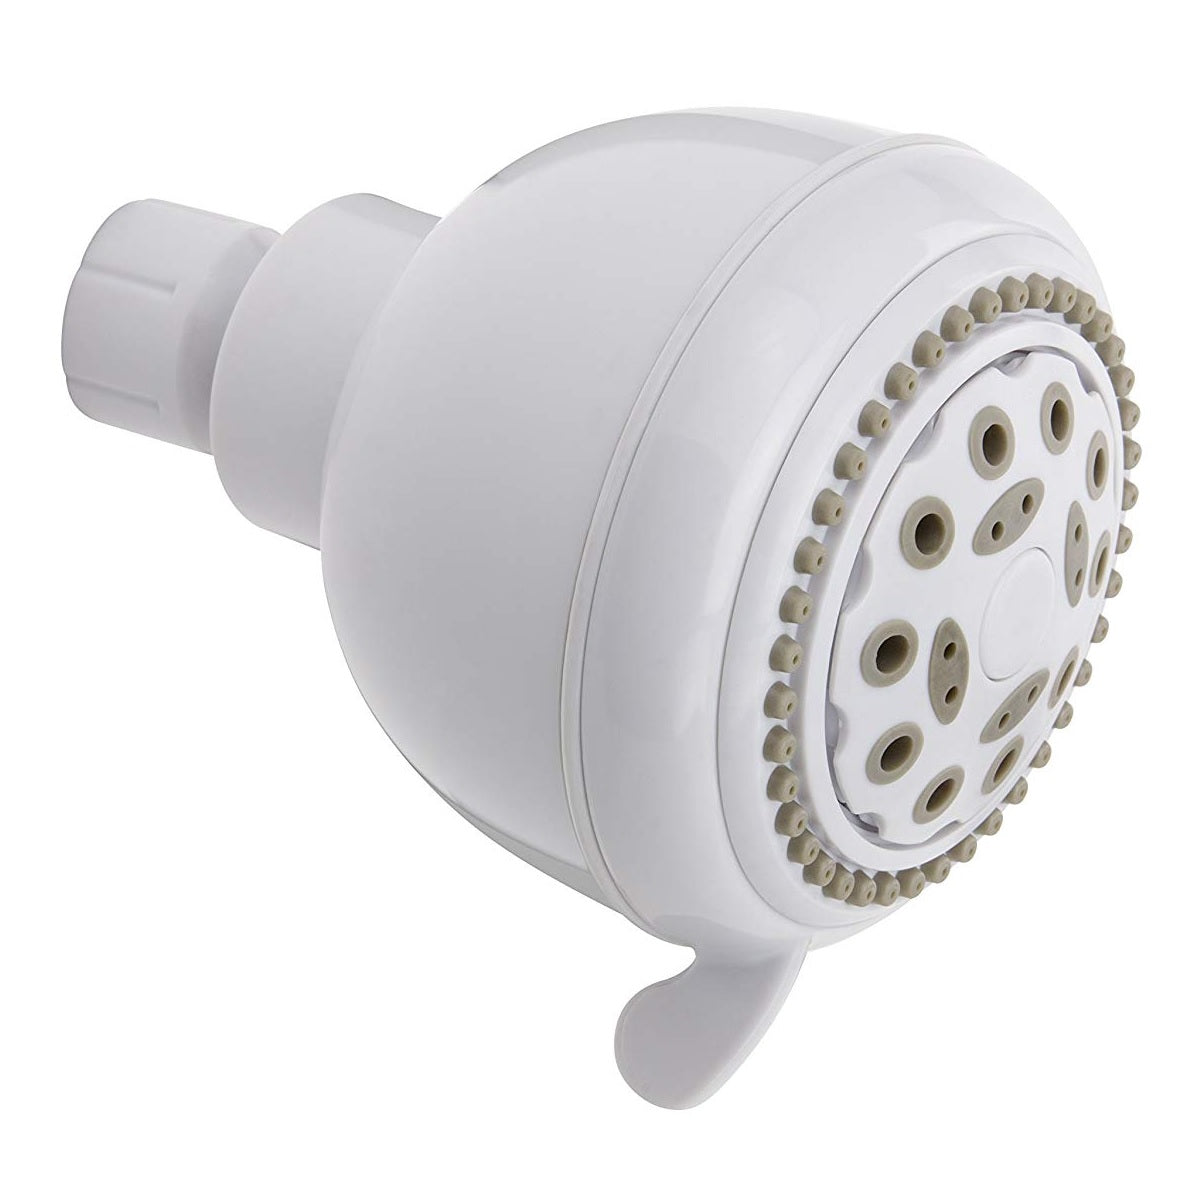 Plumb Pak K701WH Stylewise 5 Function Shower Head, 3.35", White